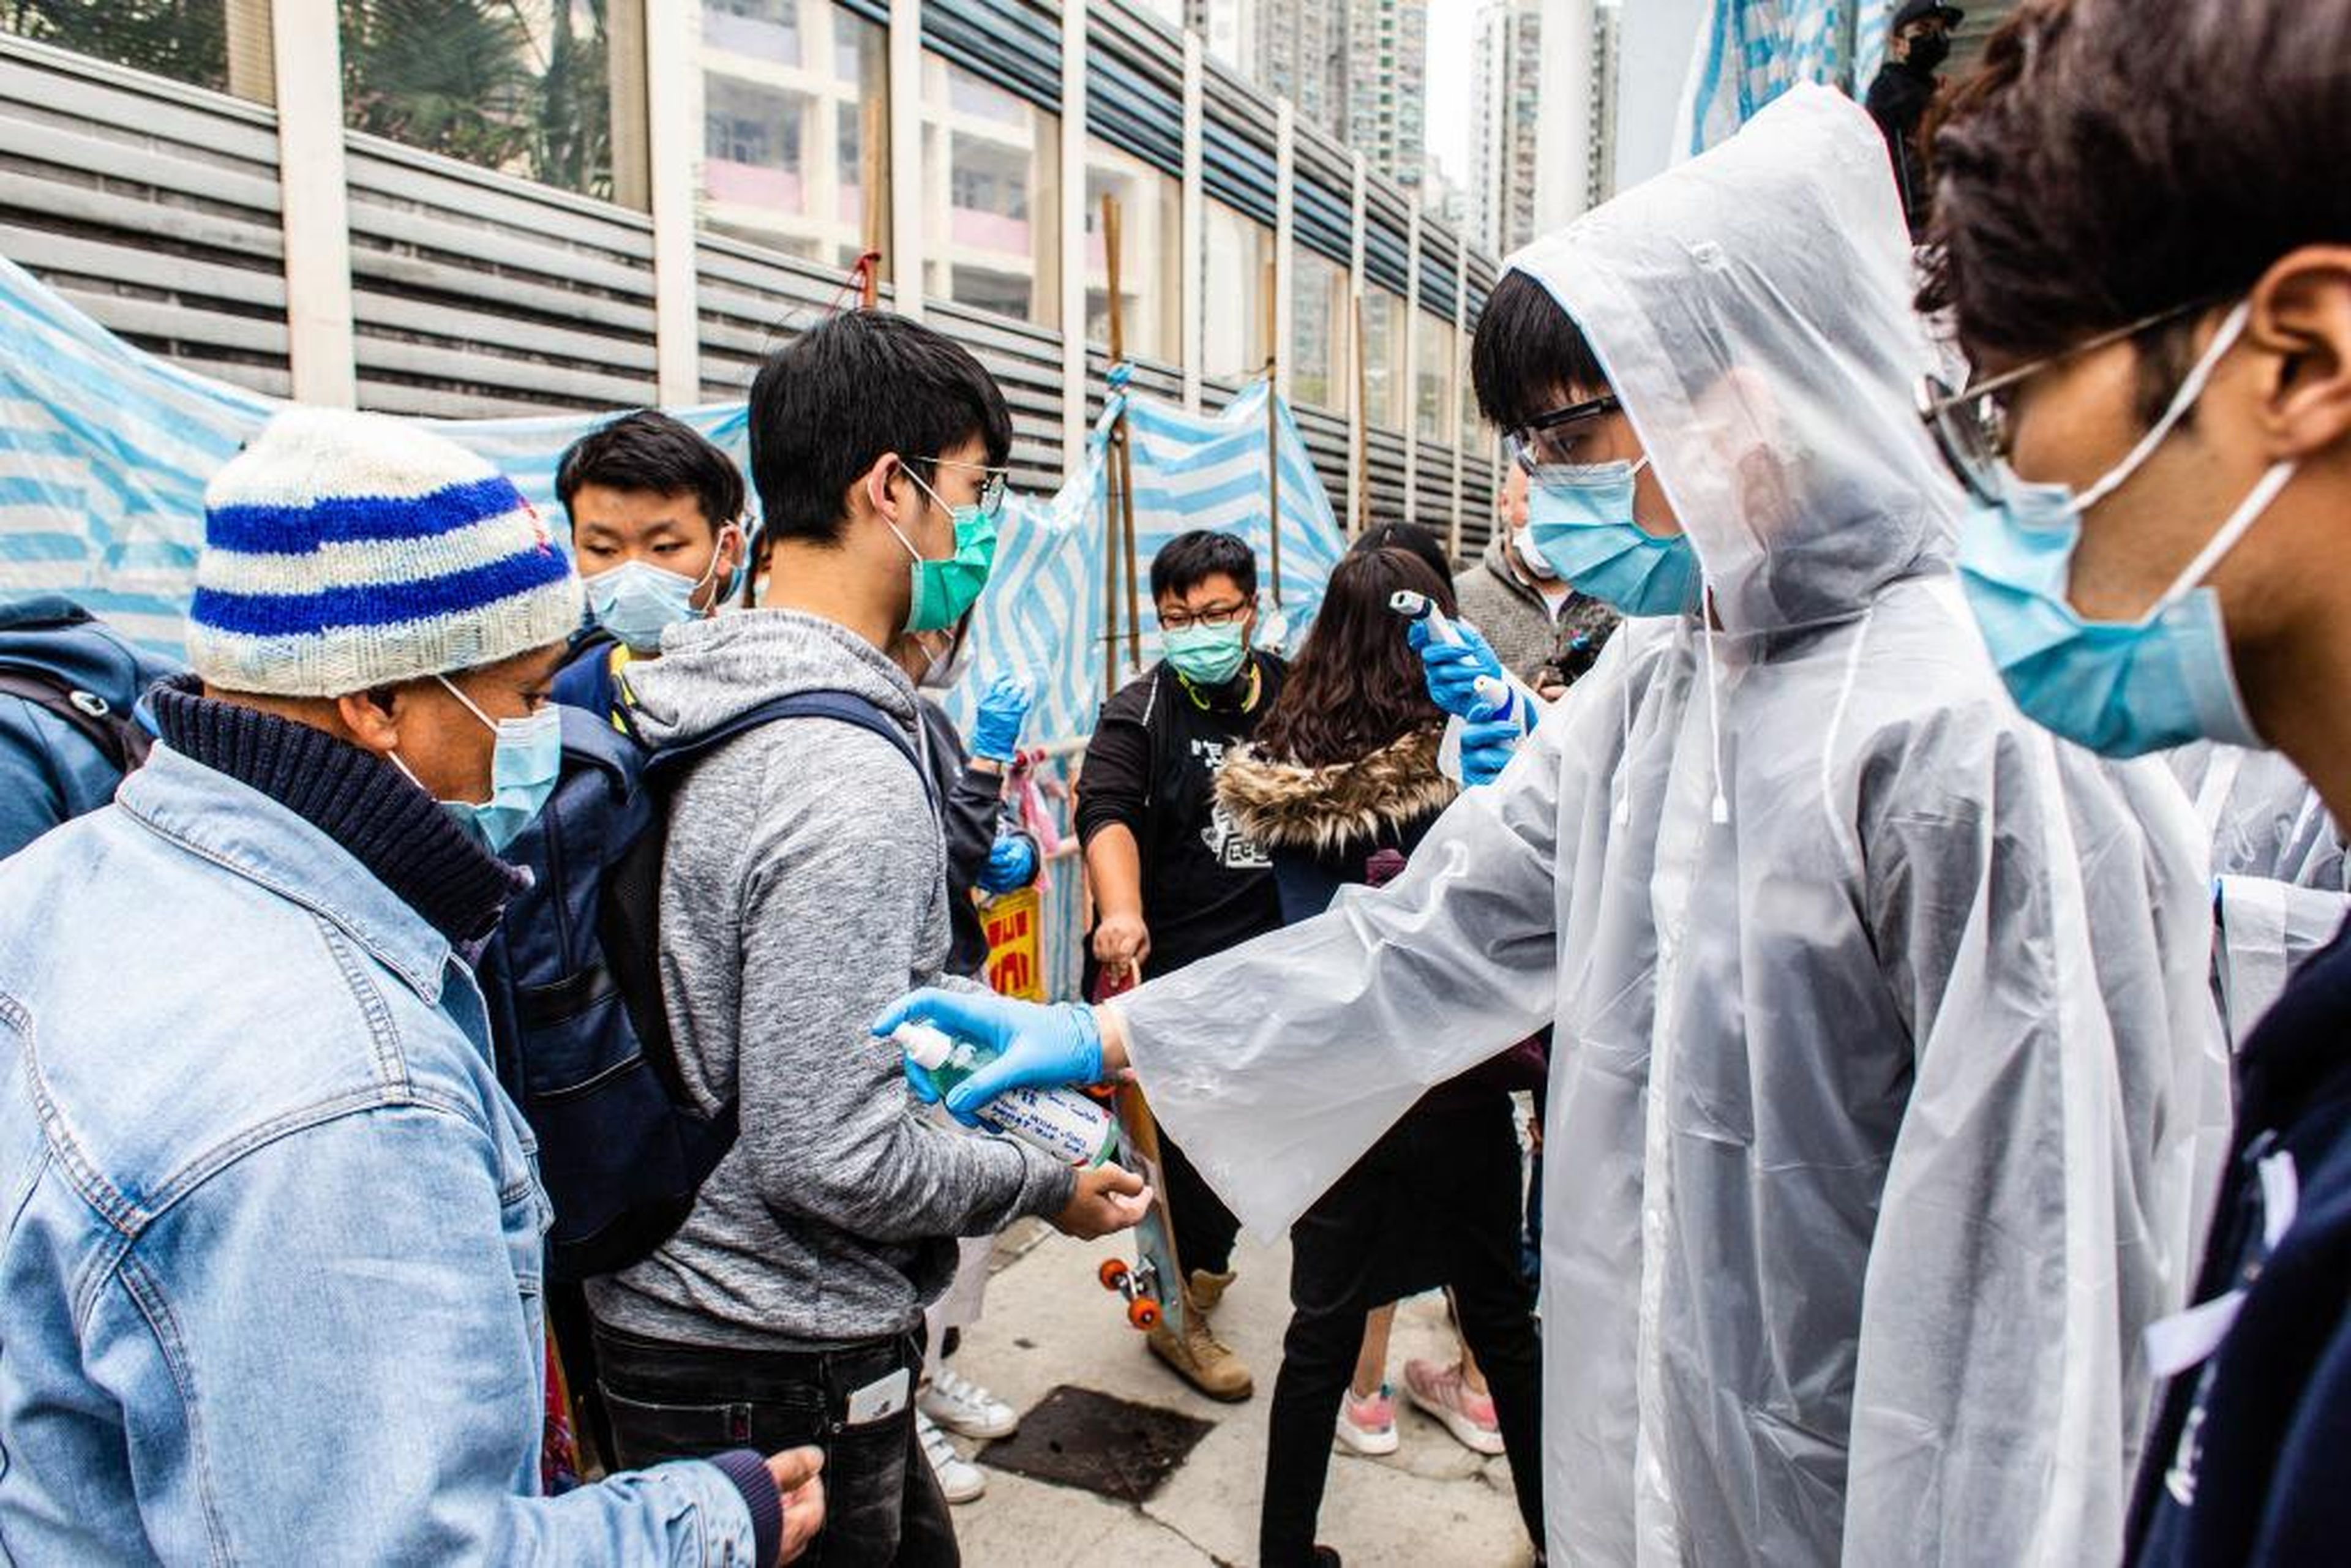 A volunteer offers hand sanitizer to passengers. In light of a coronavirus outbreak in China, Hong Kong district councilors and residents formed makeshift quarantine stations, screening passengers arriving from China. Citizens measured passenger's